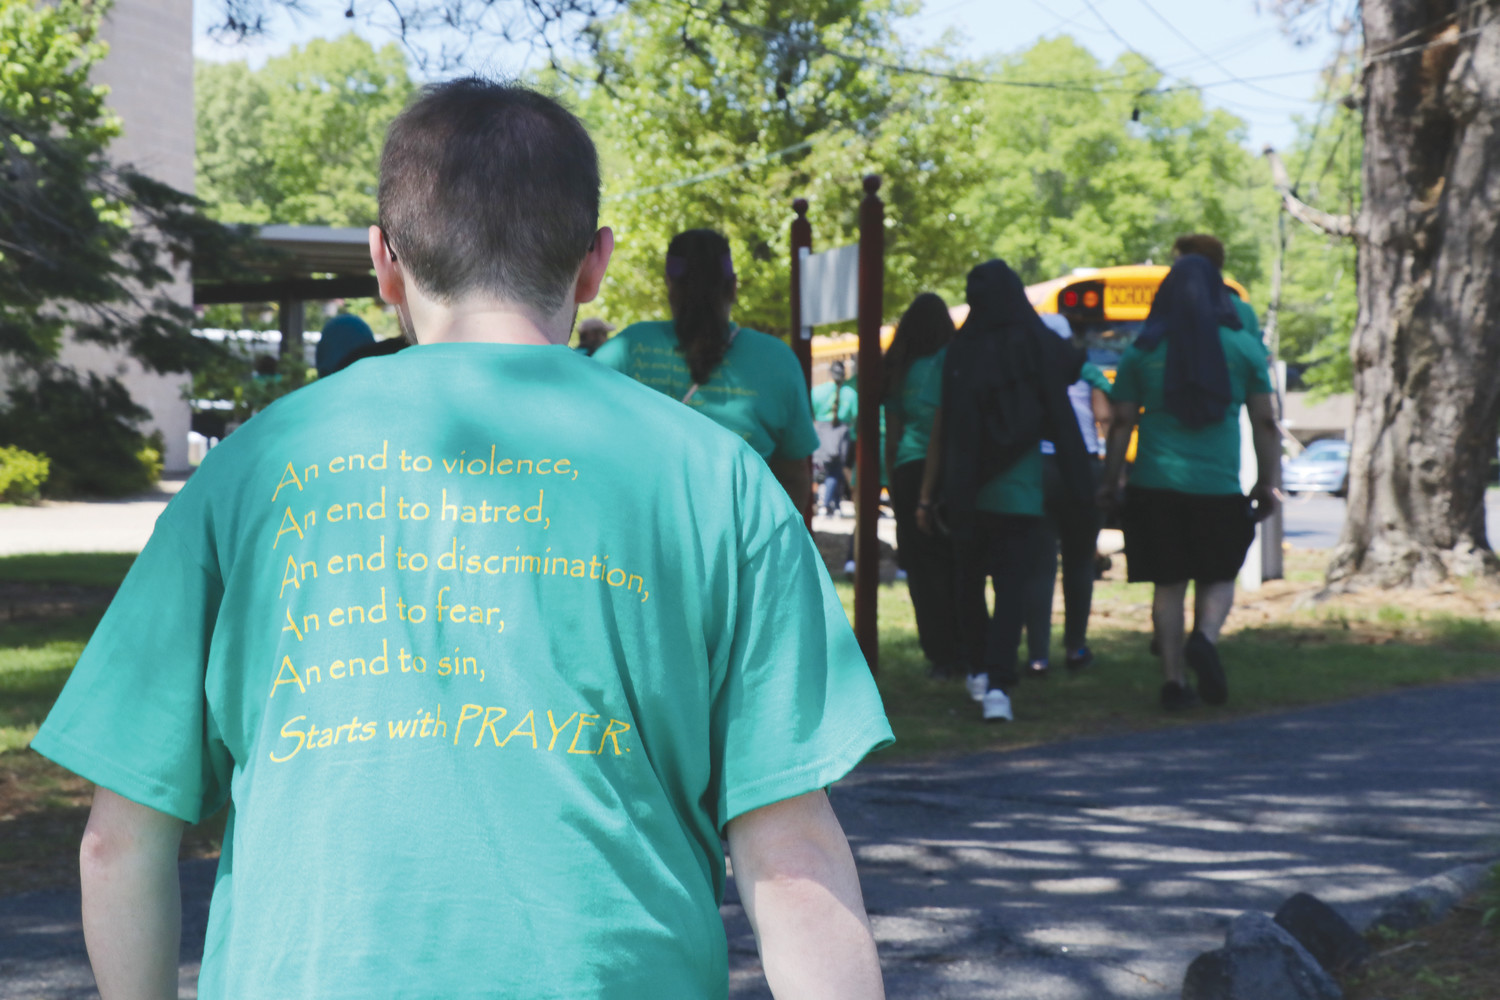 Students and staff wore shirts with a hopeful message that making peaceful and effective changes in society should always start with prayer.